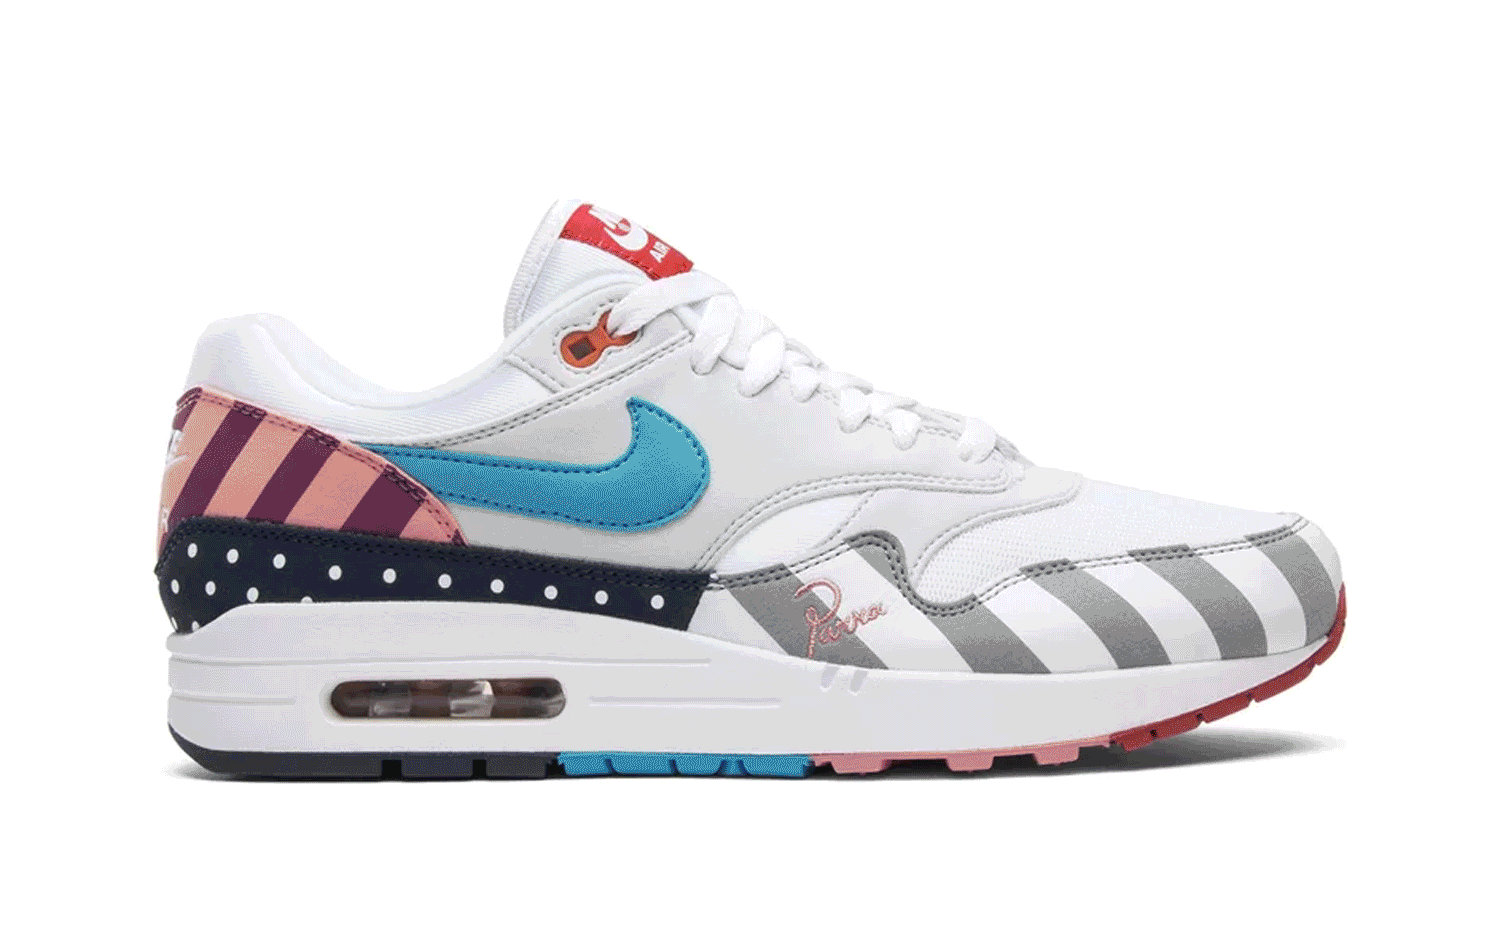 Win the Essentials Air Max Releases of the Decade with Whatnot